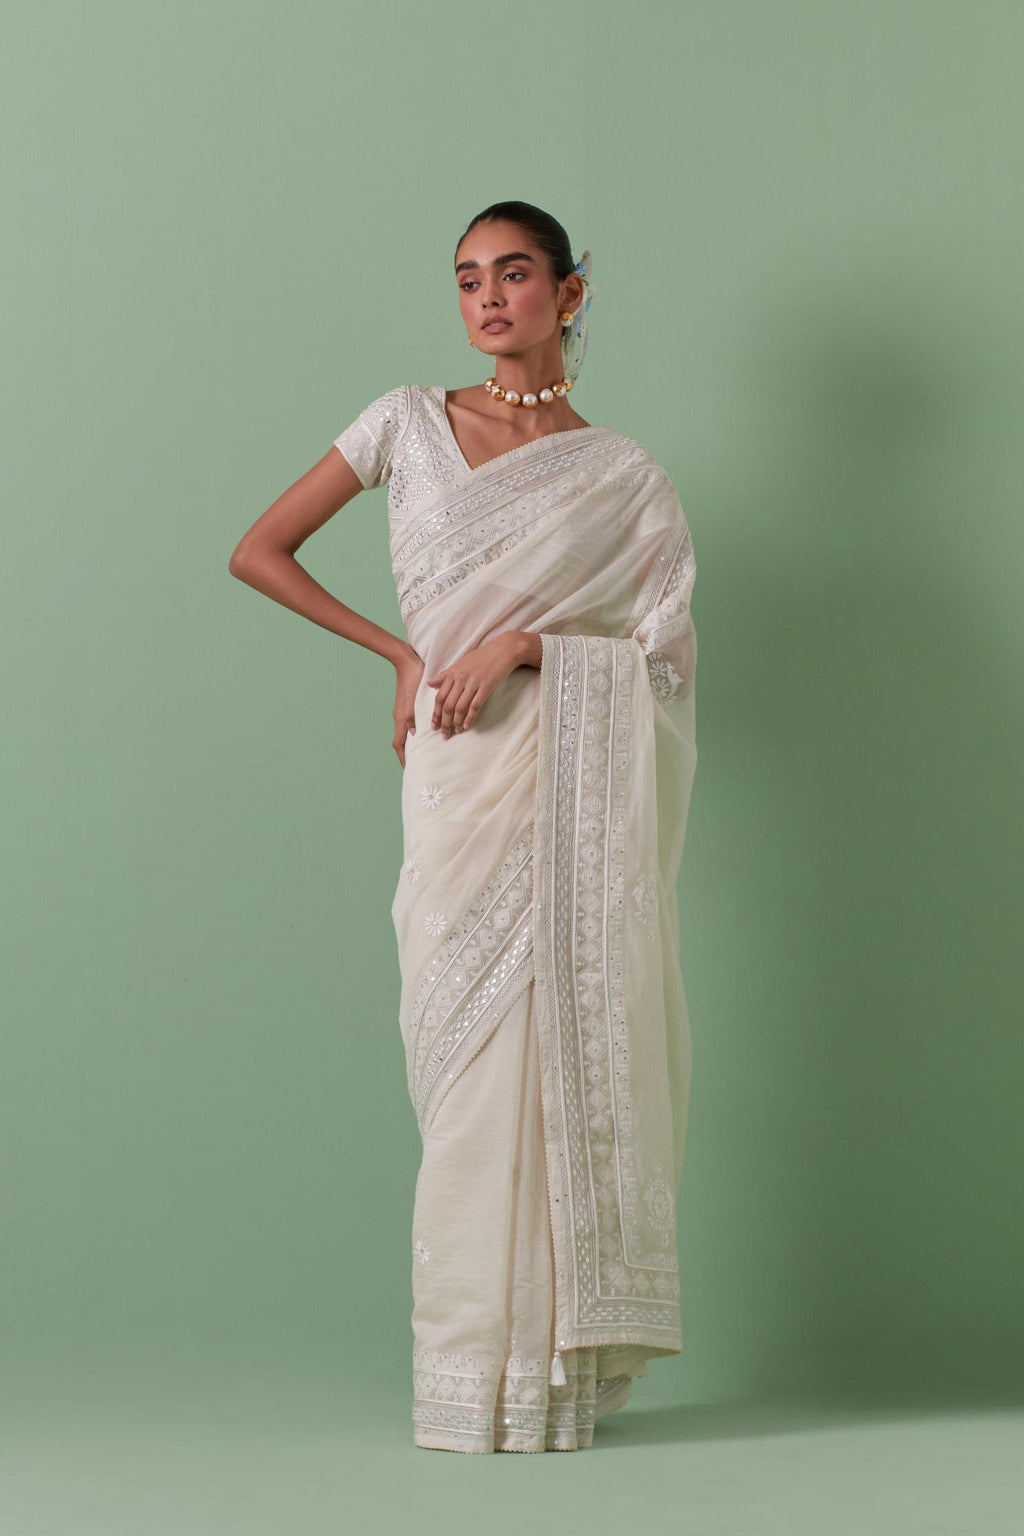 Off-white cotton chanderi saree with delicate silk thread embroidery, highlighted with braids, mirrors and sequins, paired with off white cotton chanderi embroidered blouse with deep round neck and princess seams.